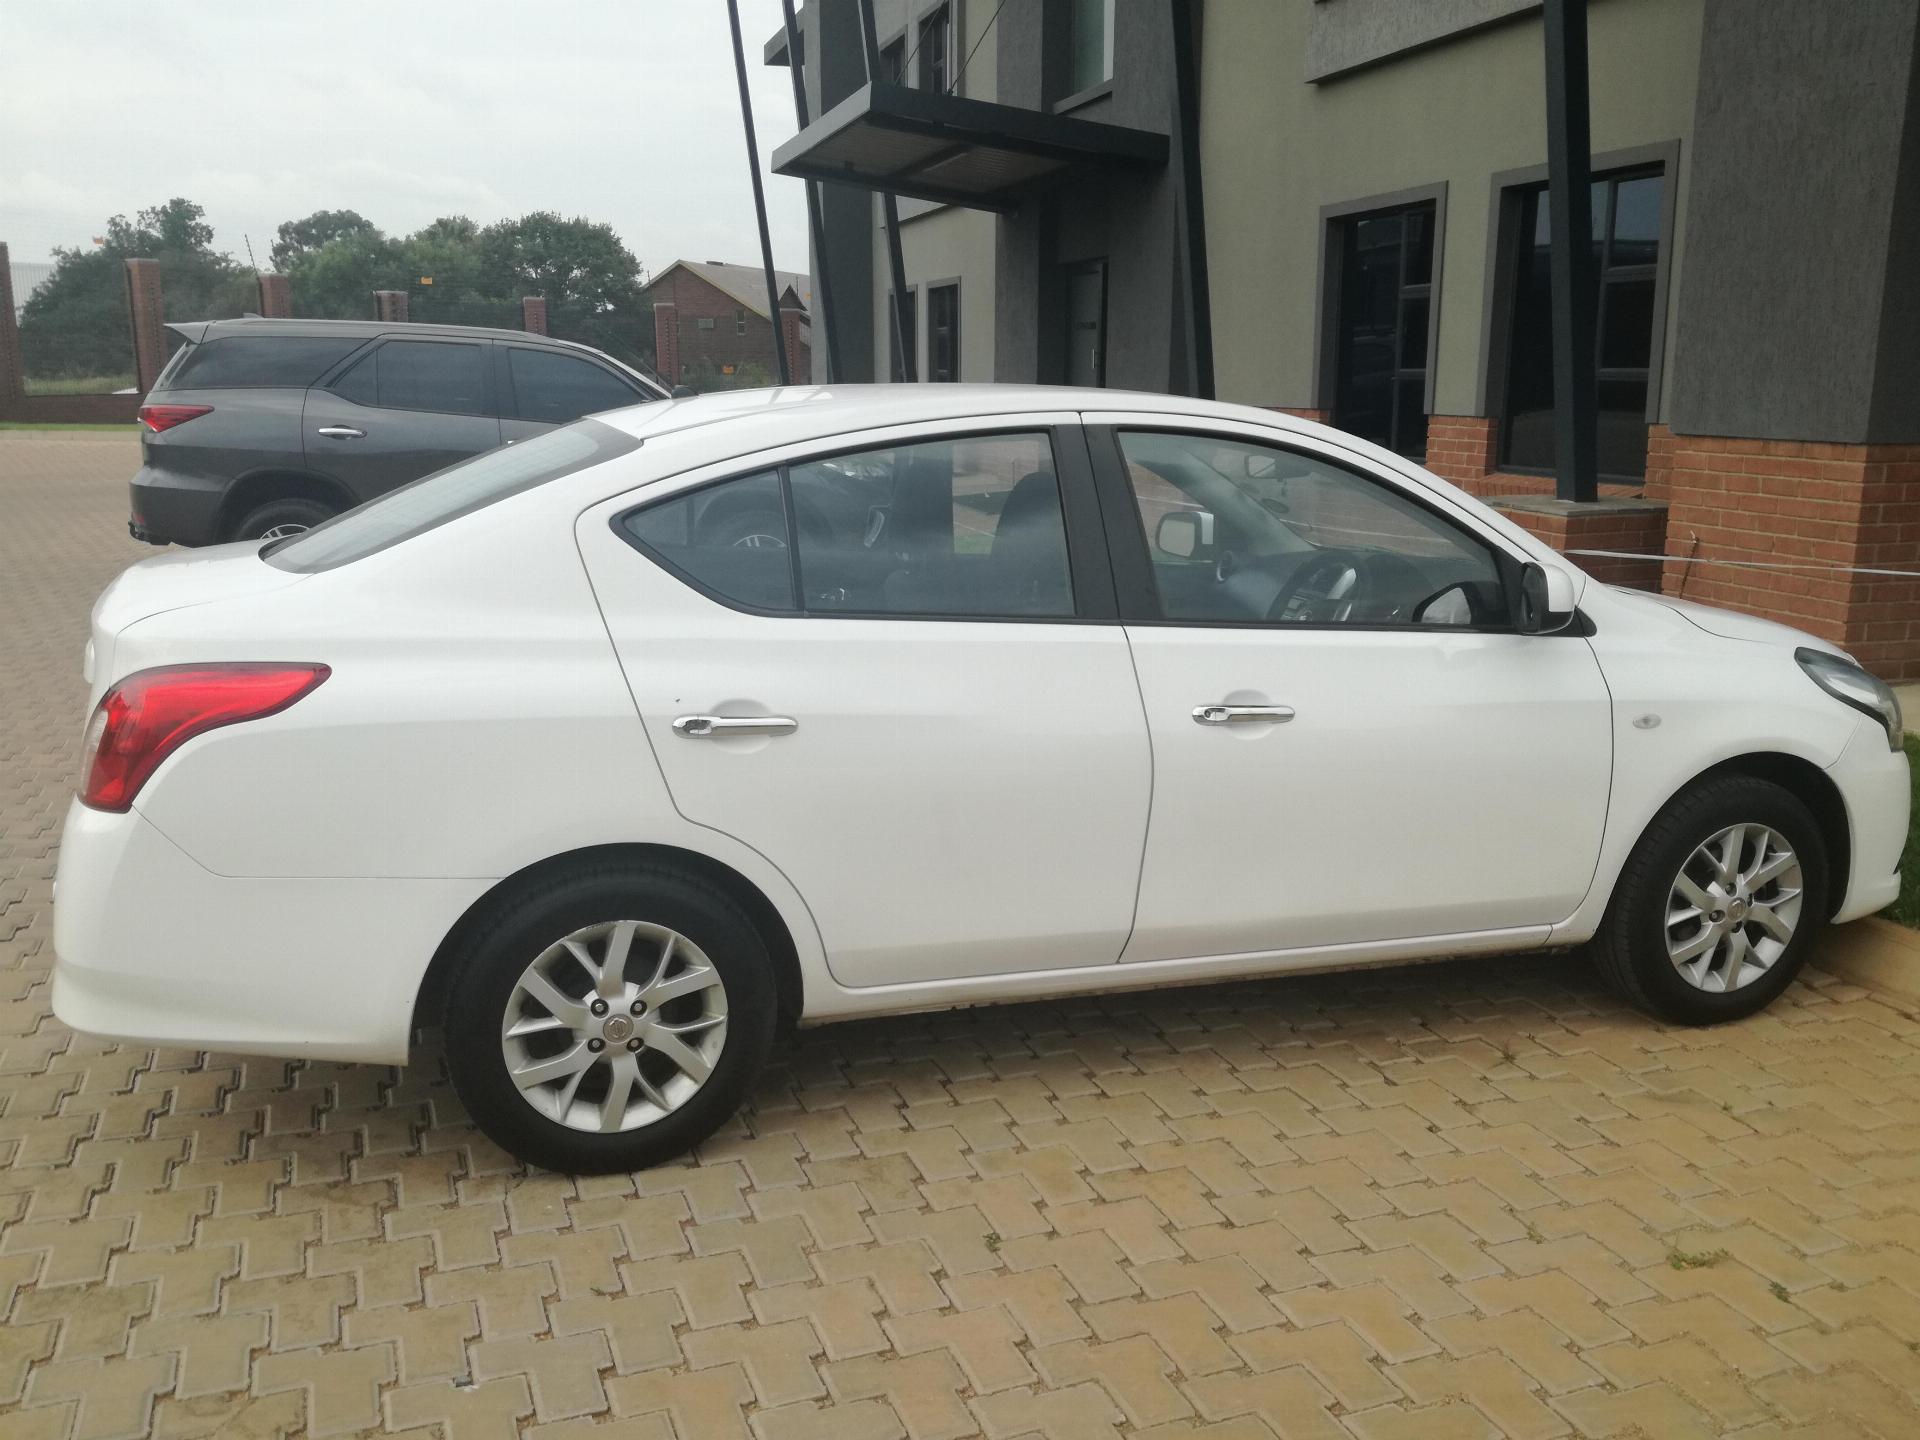 Nissan Almera White IN COLOUR, Smooth Runner And Light ON Petrol